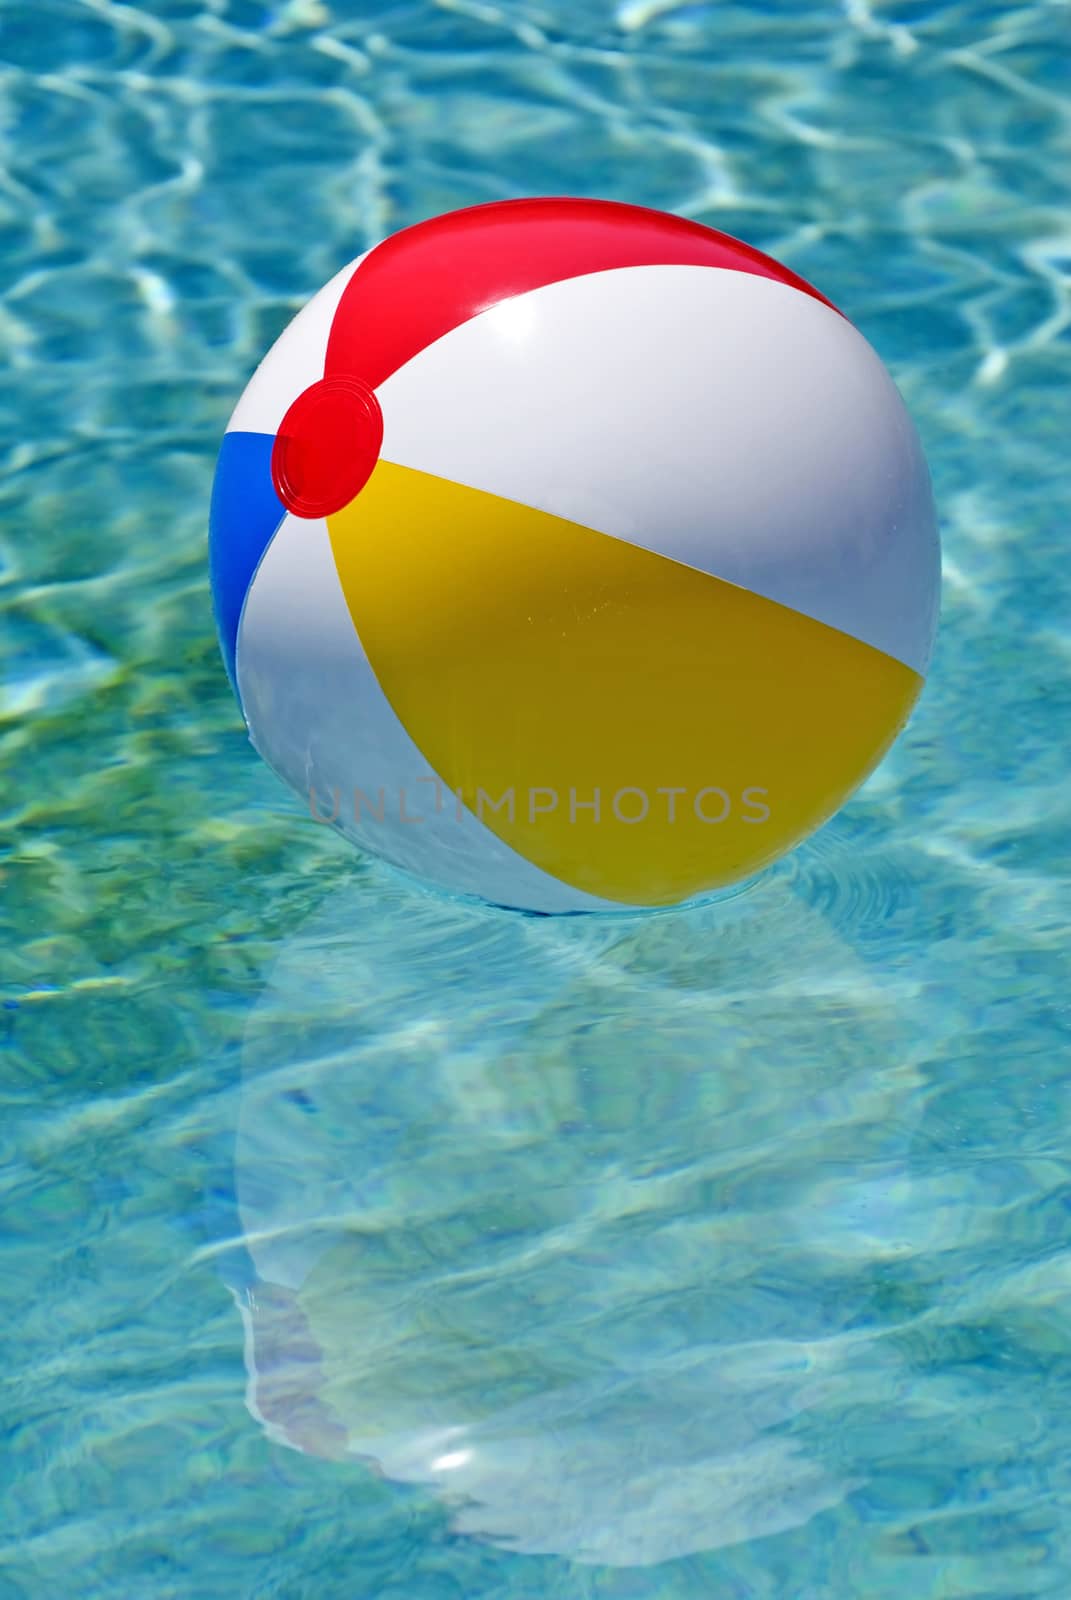 Beach Ball Floating In Swimming Pool Vertical by stockbuster1